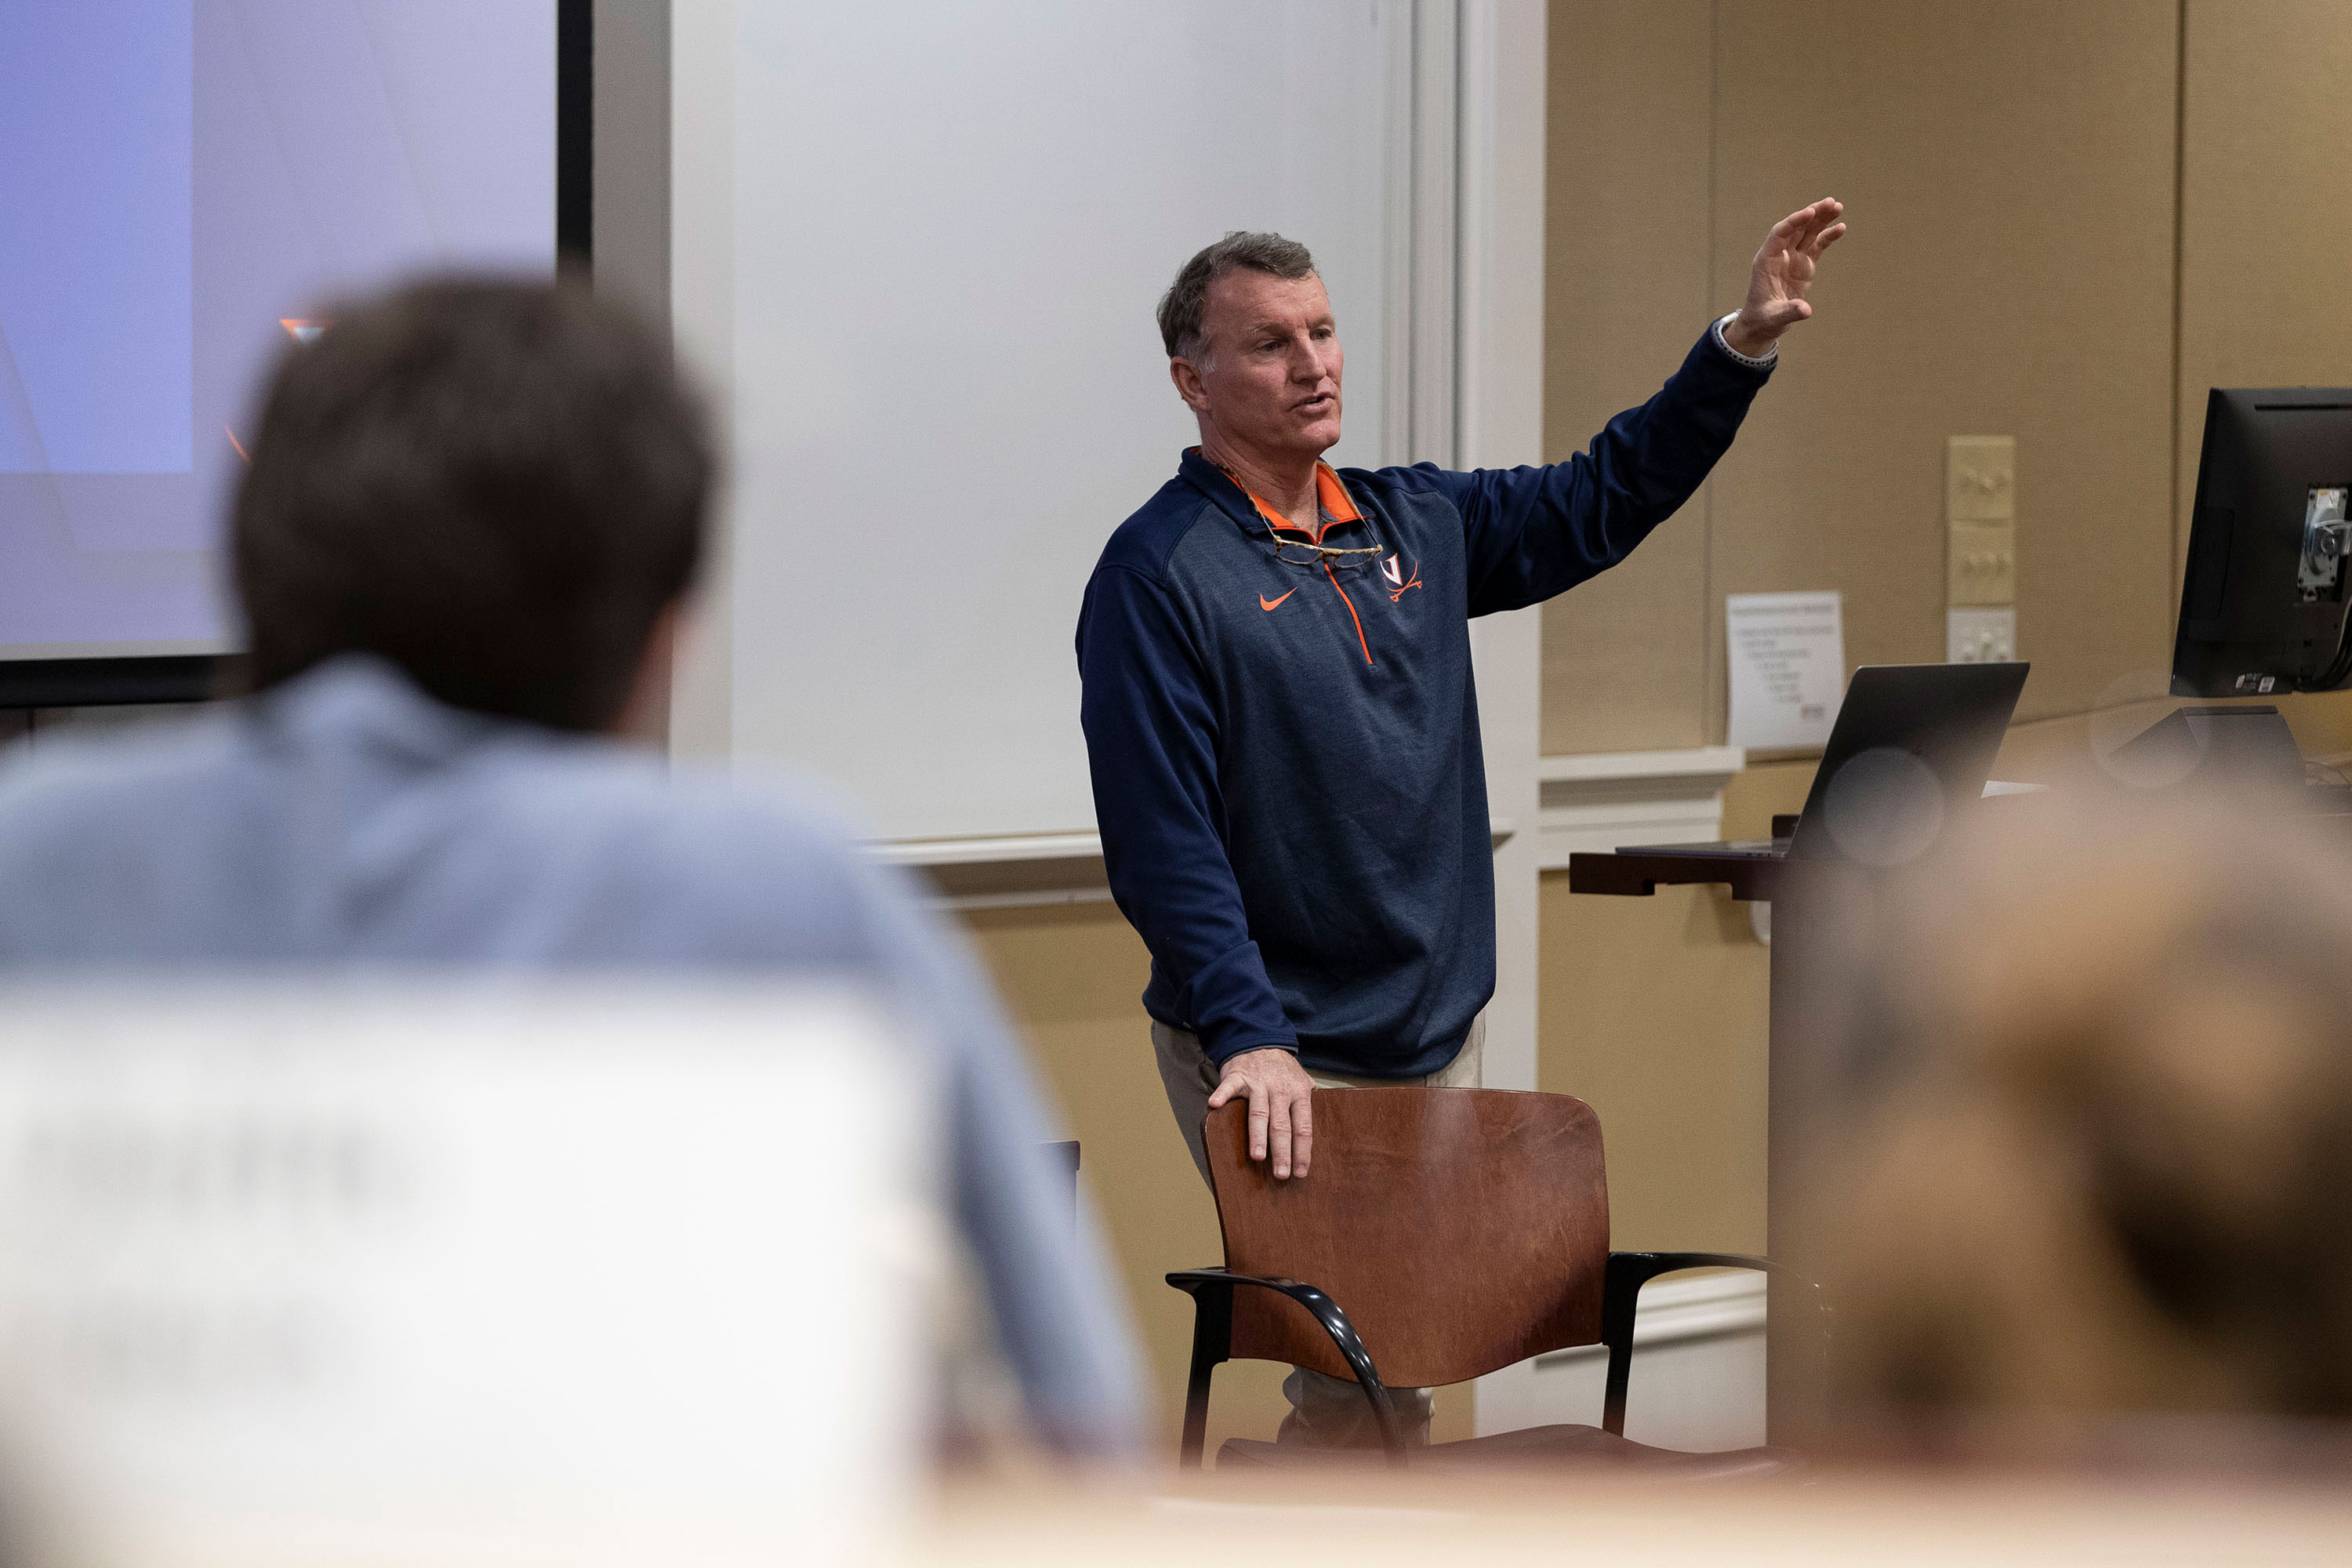 Steve Swanson standing in front of a class speaking with his hand raised